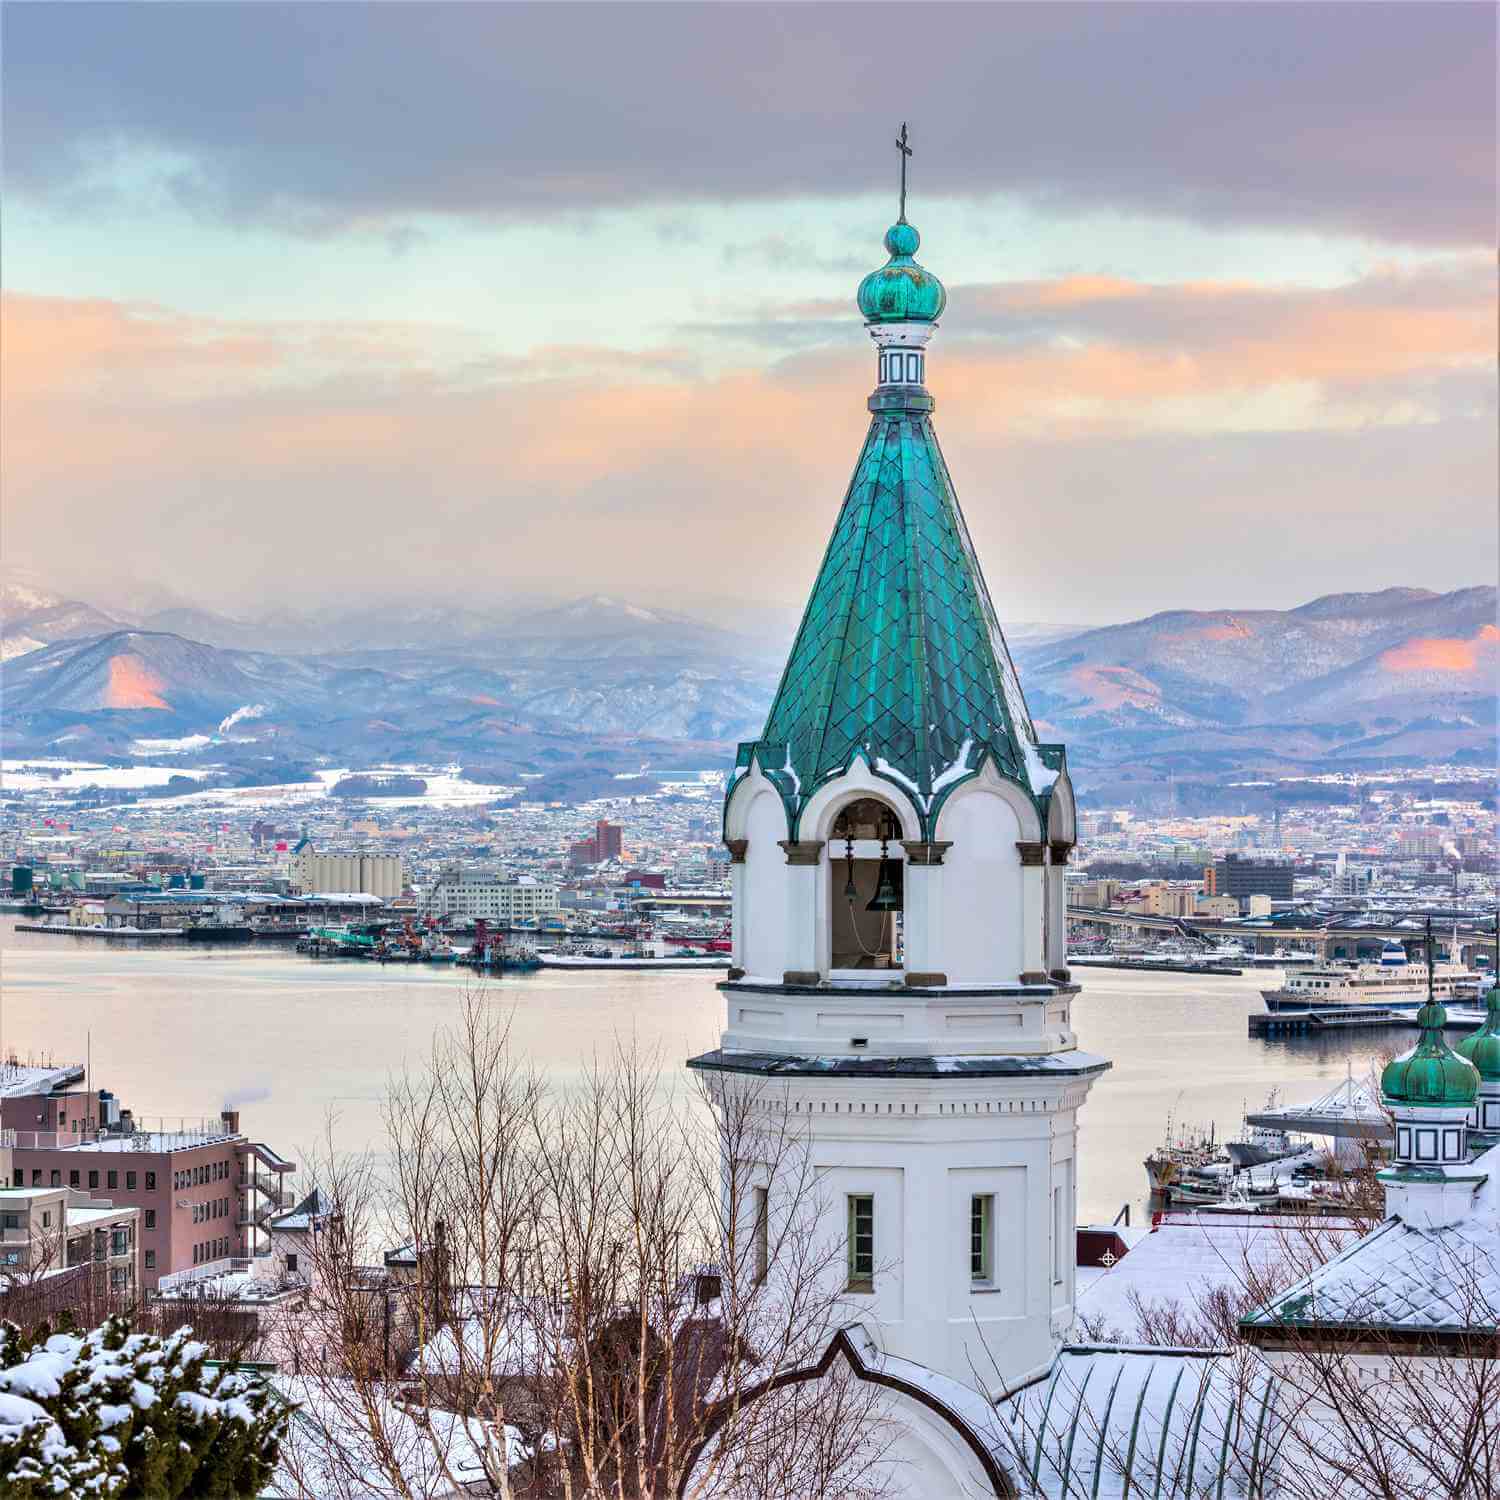 The city of Hakodate seen from the slope of Motomachi = Shutterstock